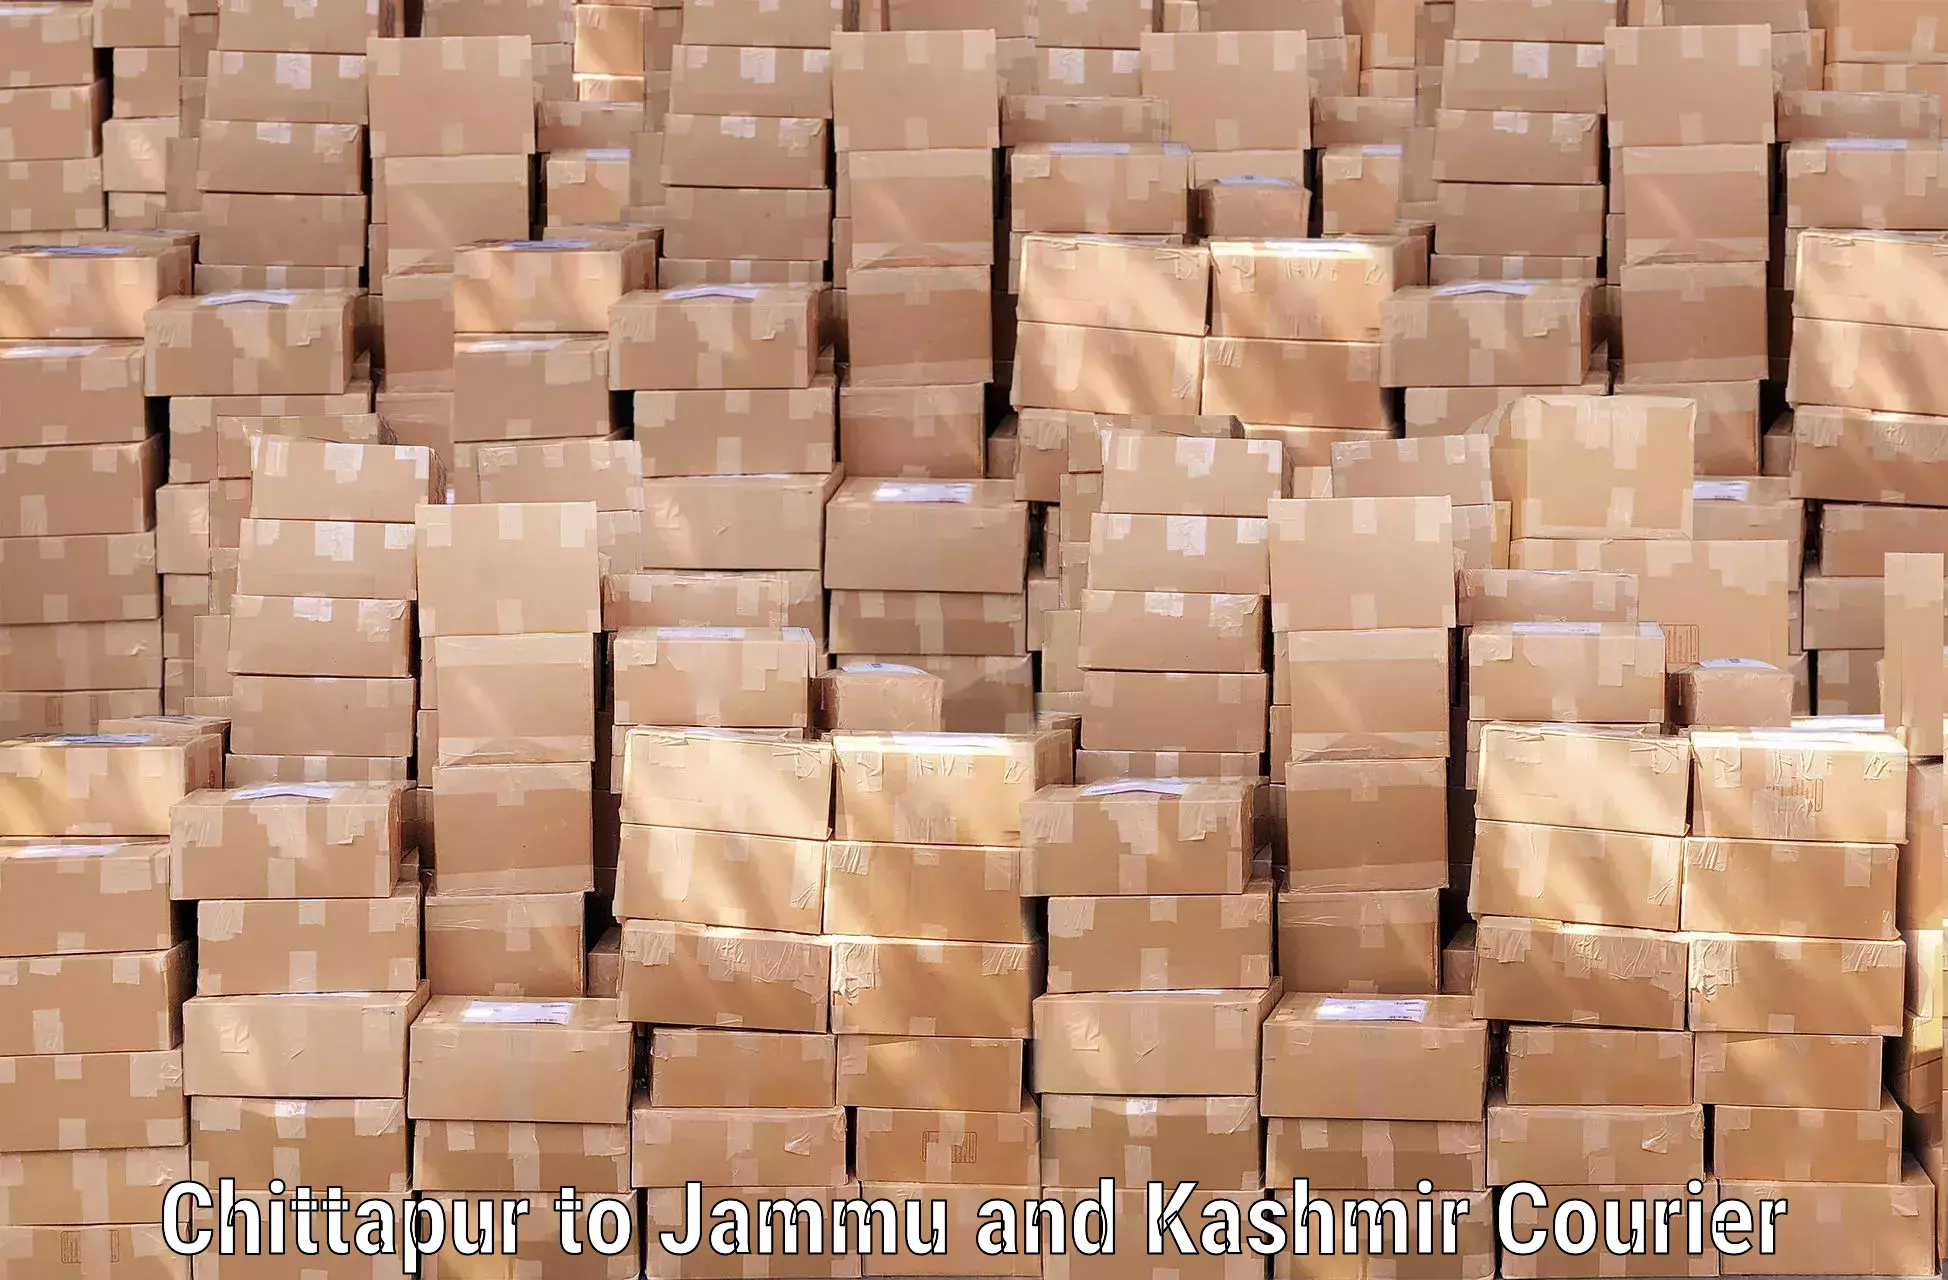 Luggage transport consulting Chittapur to Jammu and Kashmir